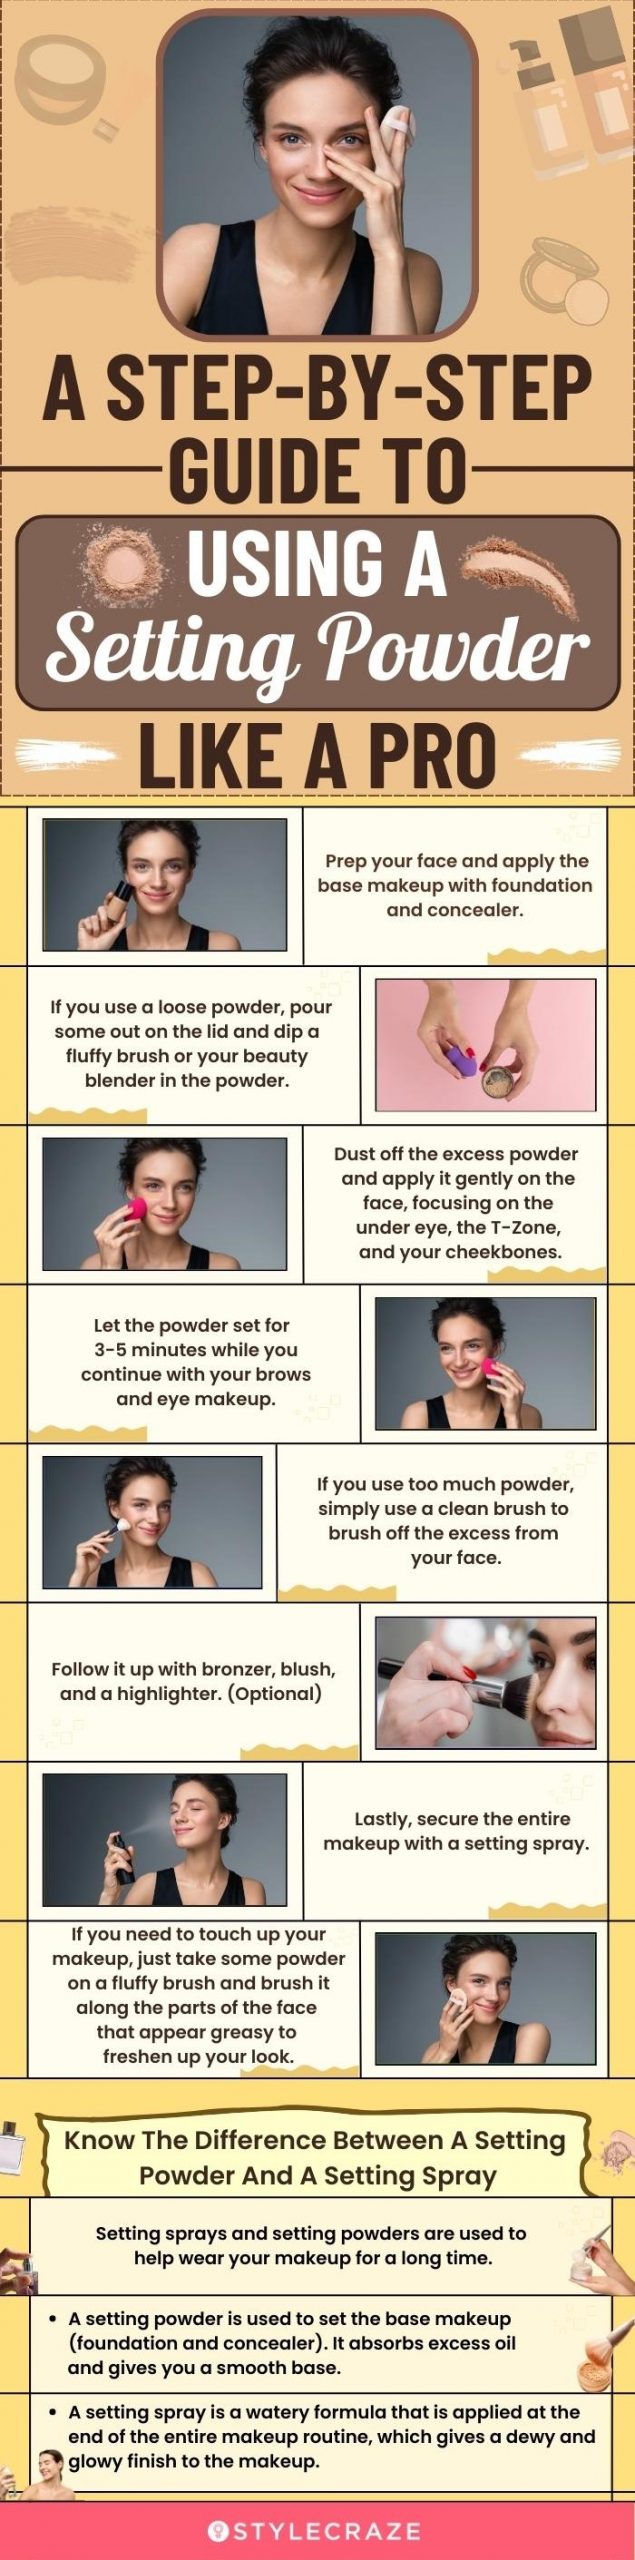 A Step-By-Step Guide To Using A Setting Powder Like A Pro  [infographic]